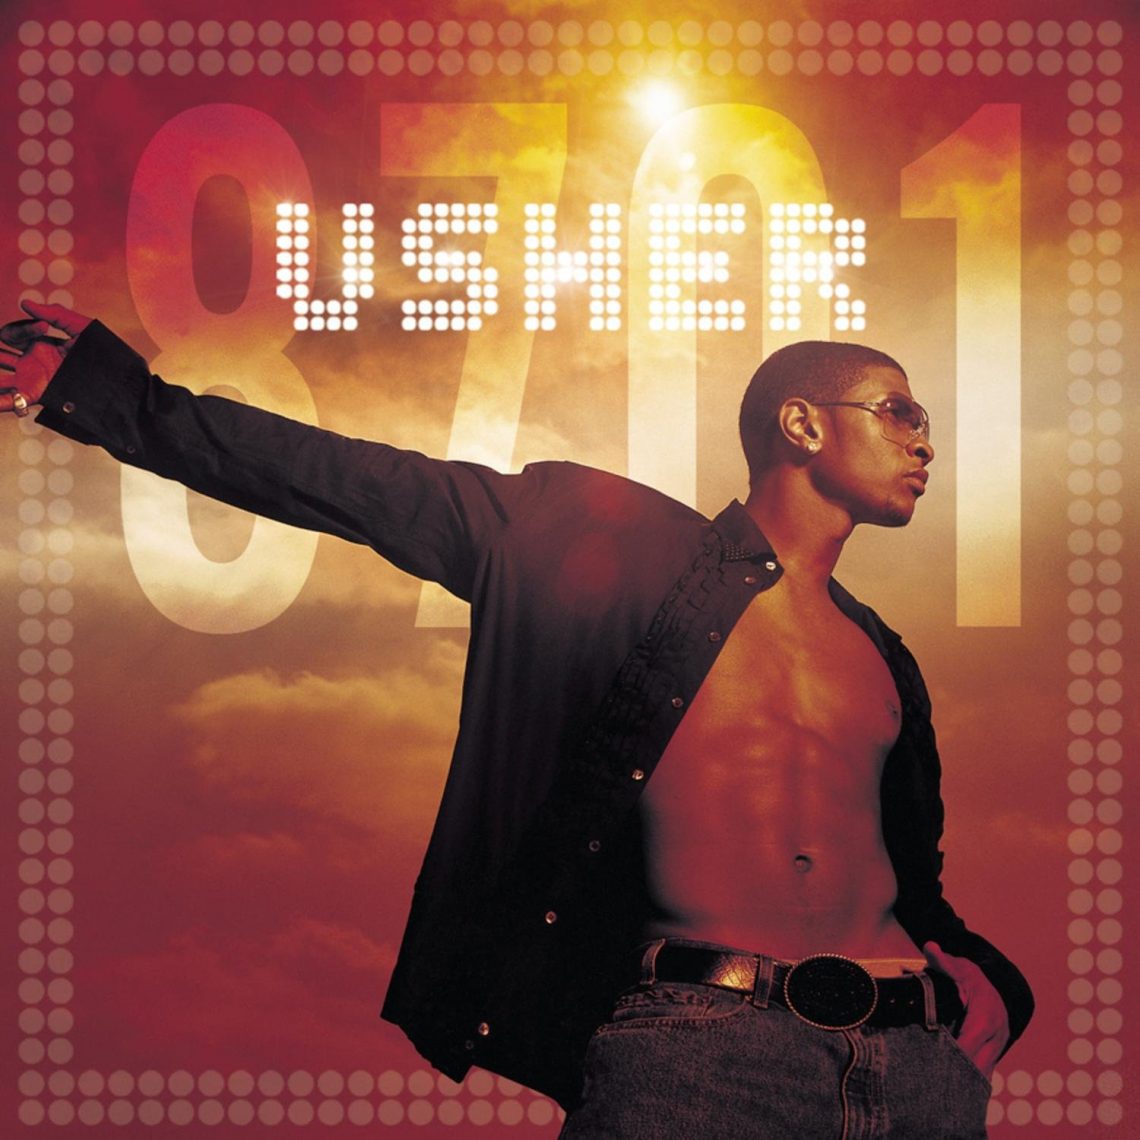 The Usher 8701 Album Turns 20 Years Old Today